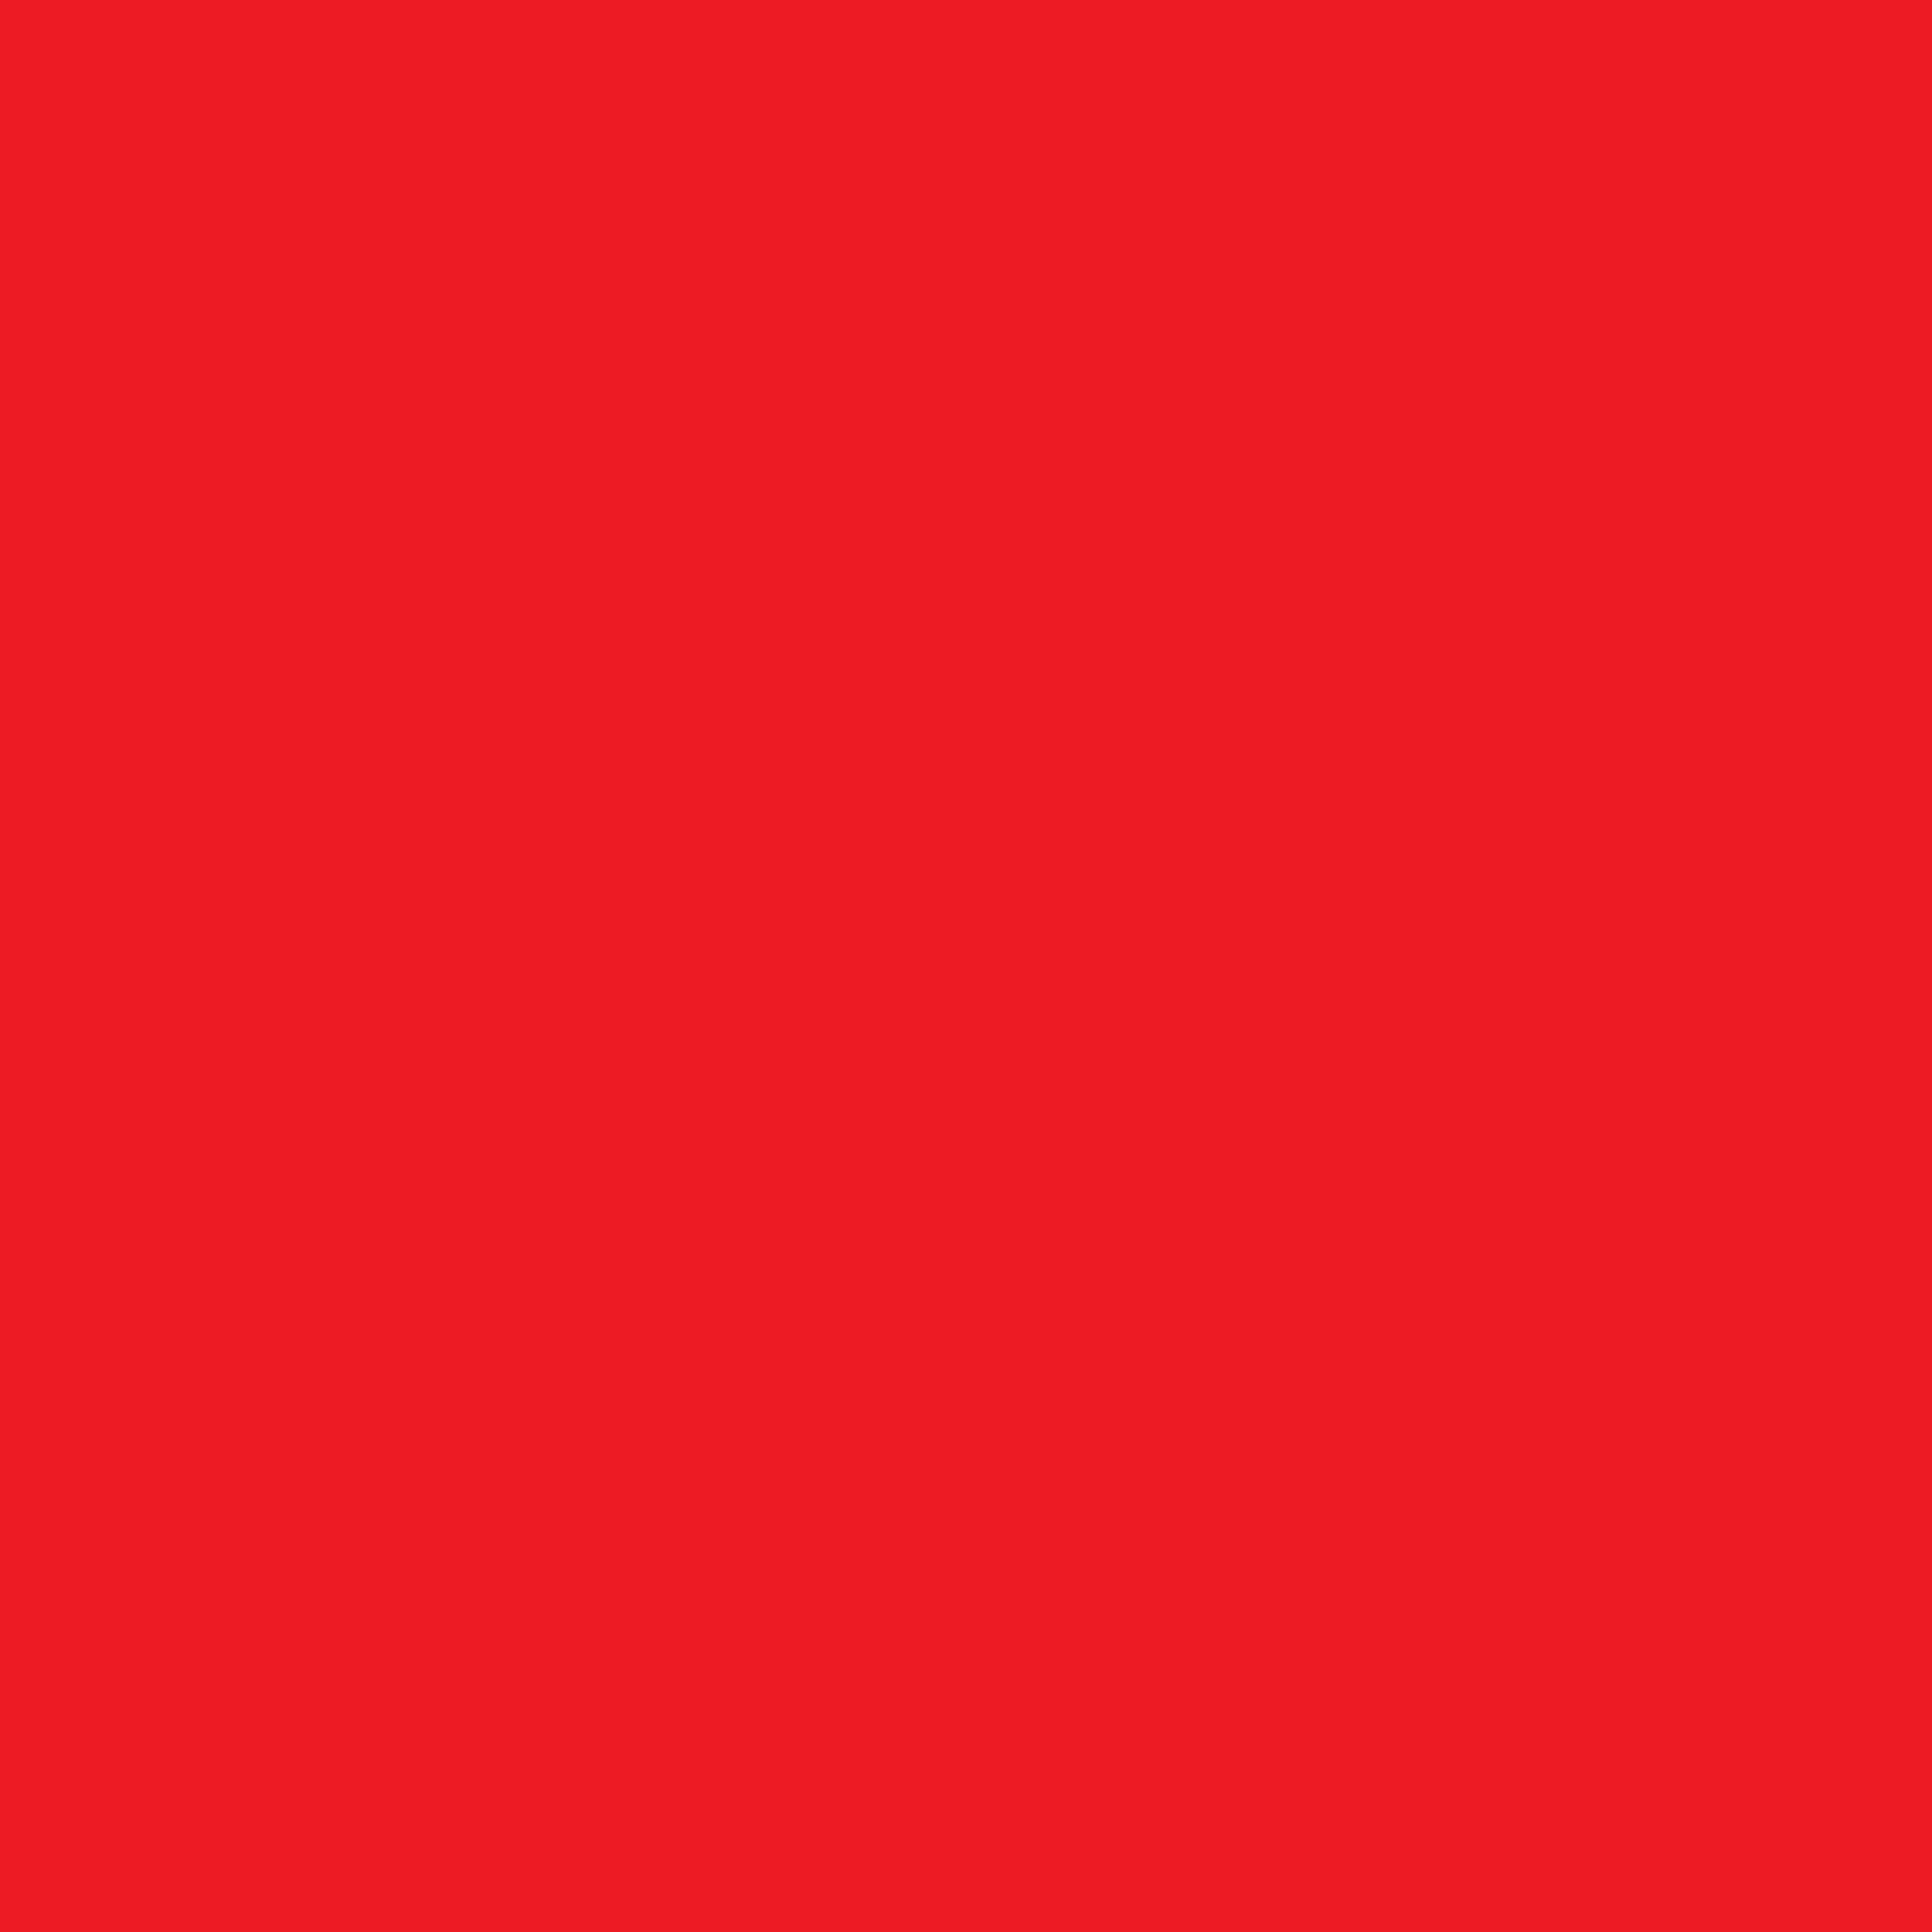 3600x3600 Red Pigment Solid Color Background